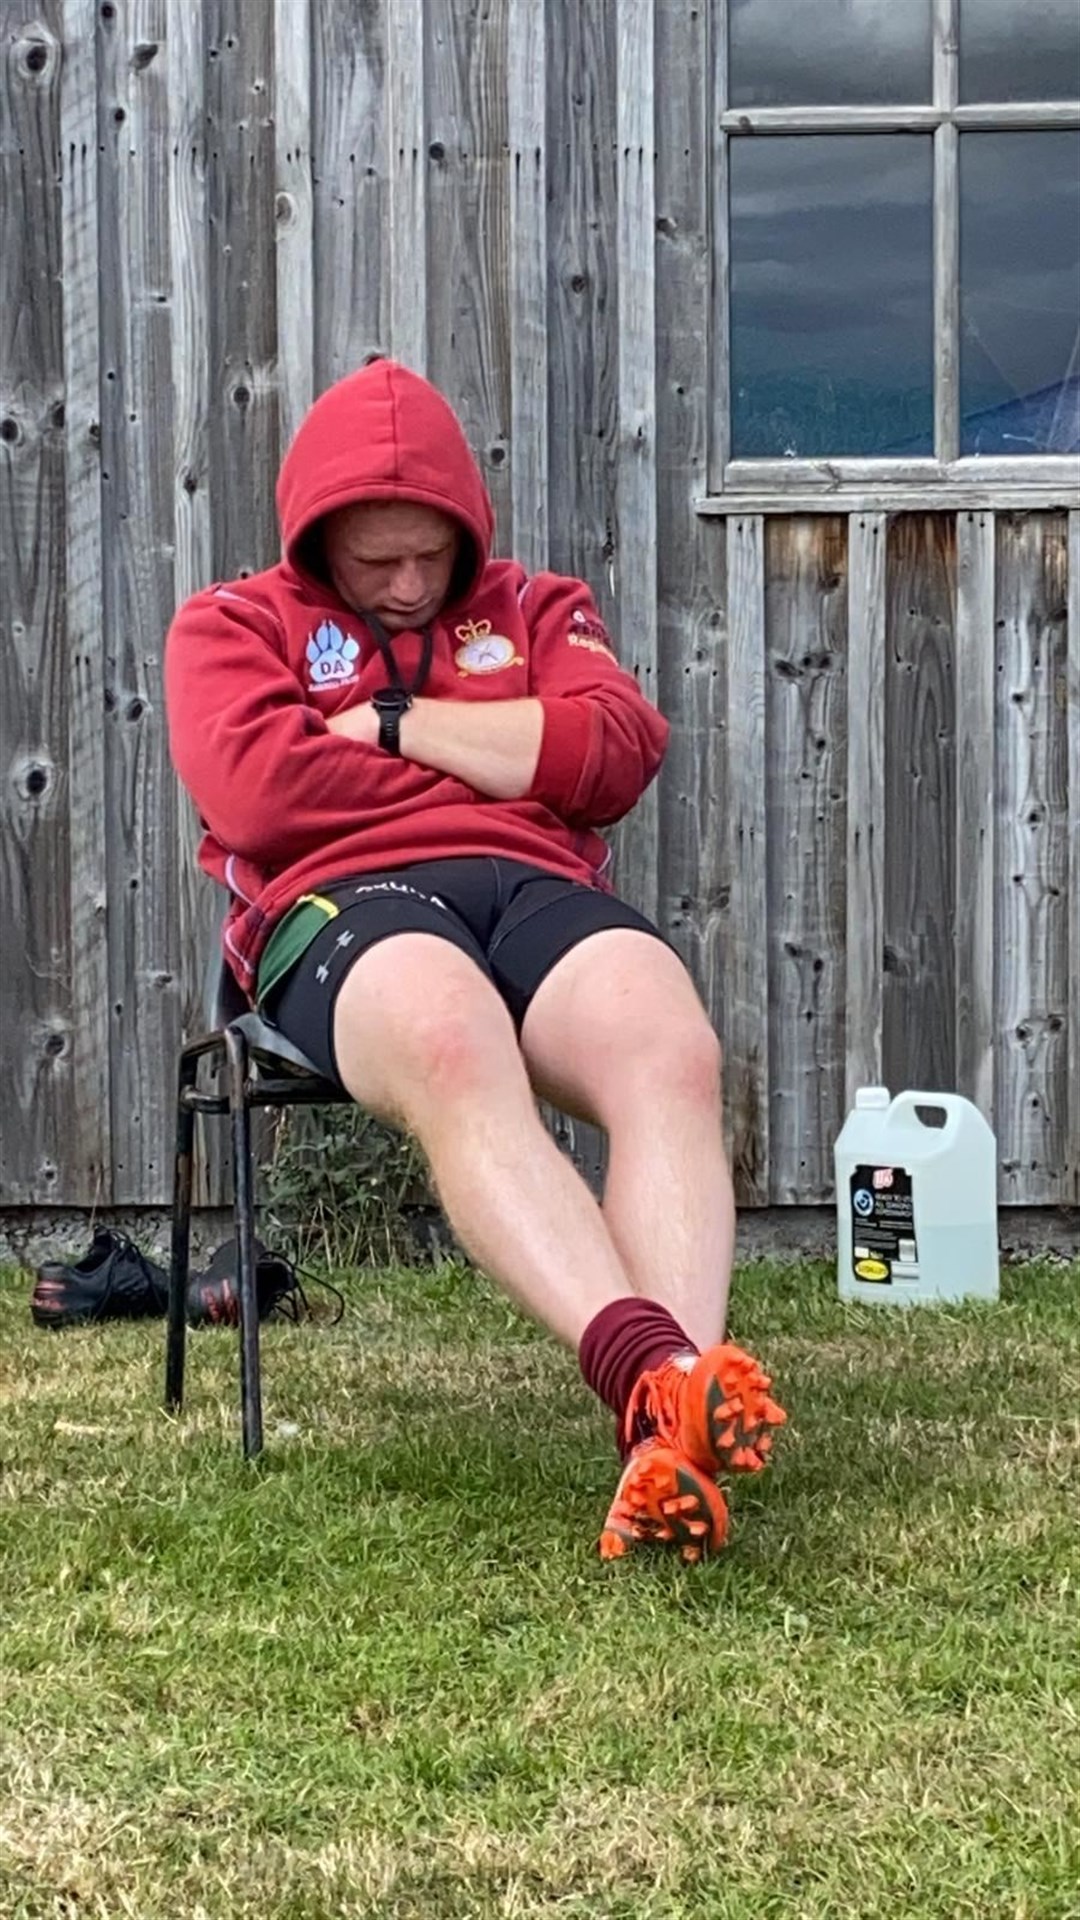 One of the RAF Lossiemouth rugby team takes a well-earned rest.